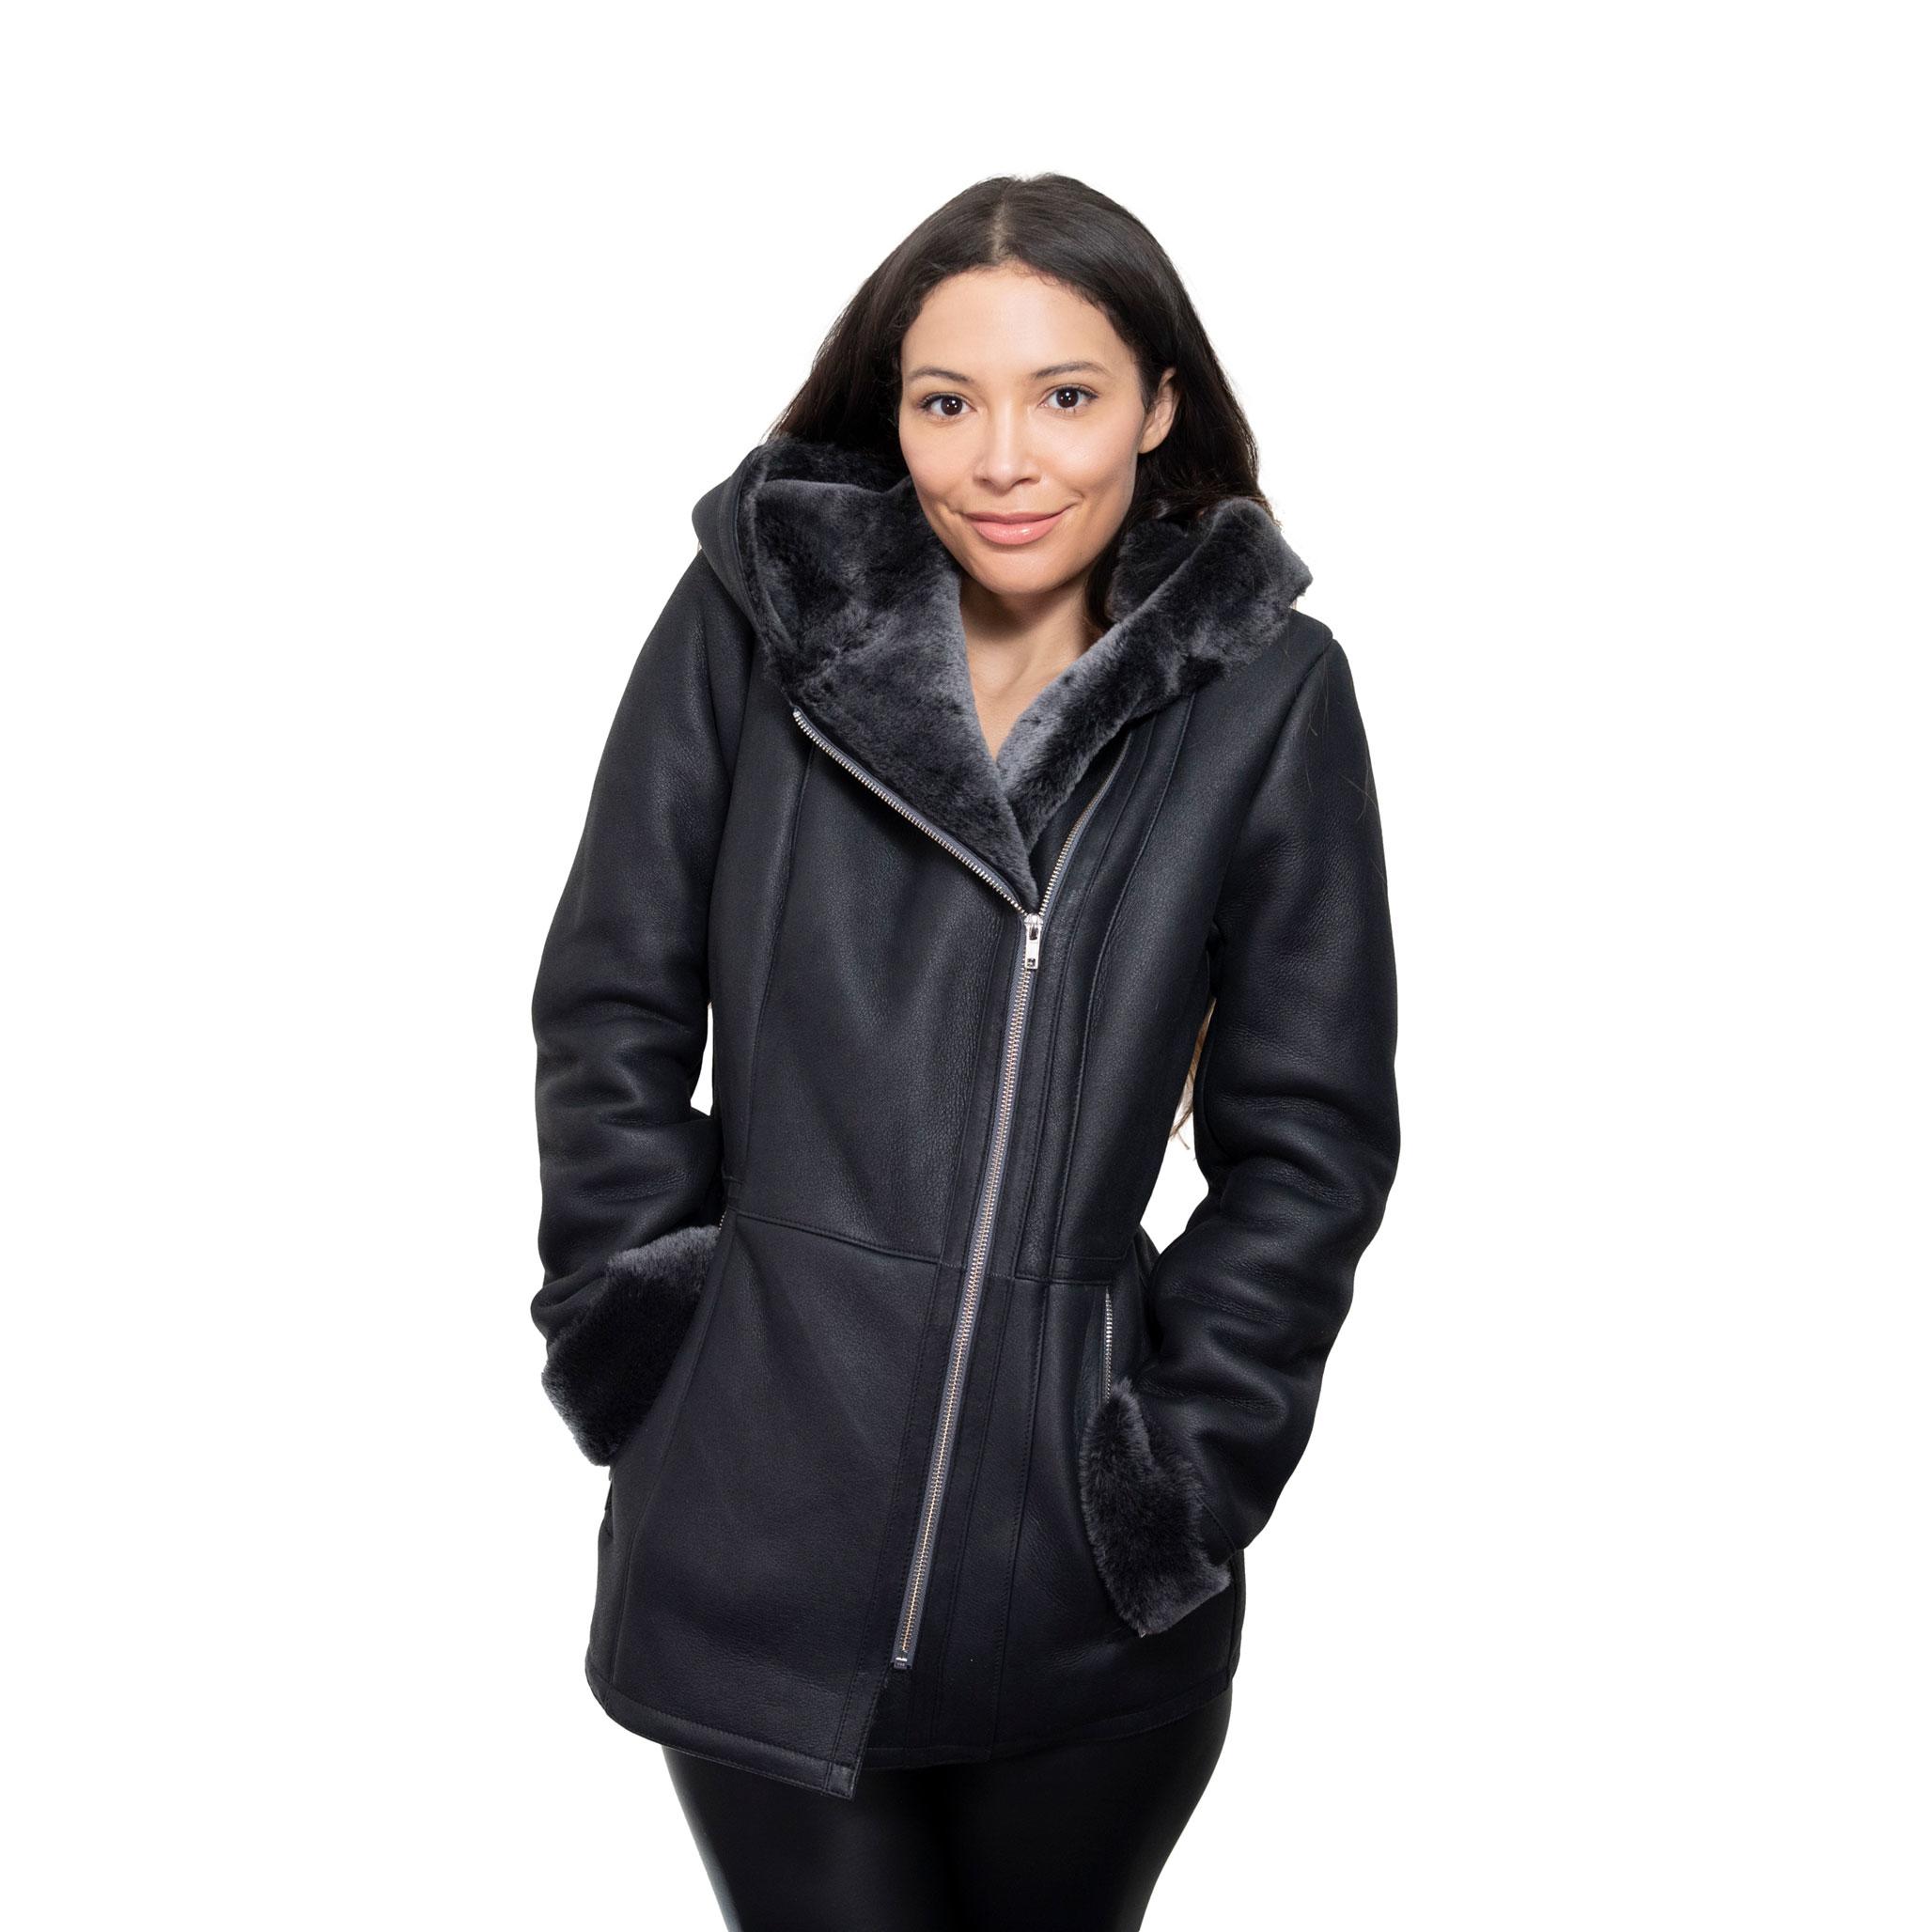 A lady model strikes a cosy pose, with her hands placed within the side pocket of her luxurious, black sheepskin coat. The sheepkin coat has a hood, lined with butter soft fur.